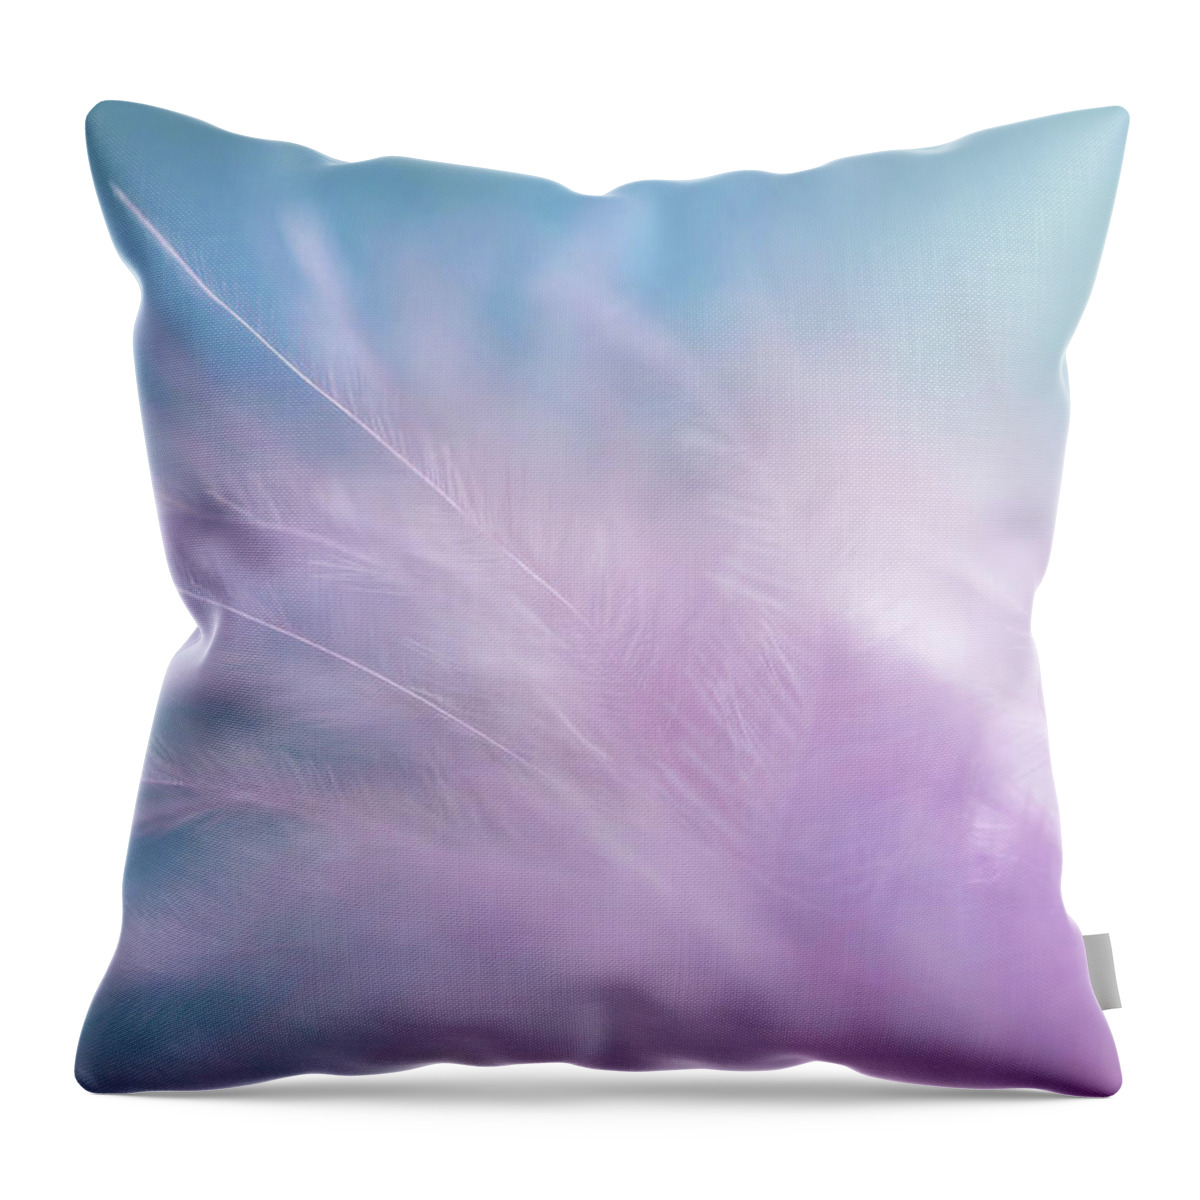 Jenny Rainbow Fine Art Photography Throw Pillow featuring the photograph Angels Flight Series. Tenderness by Jenny Rainbow